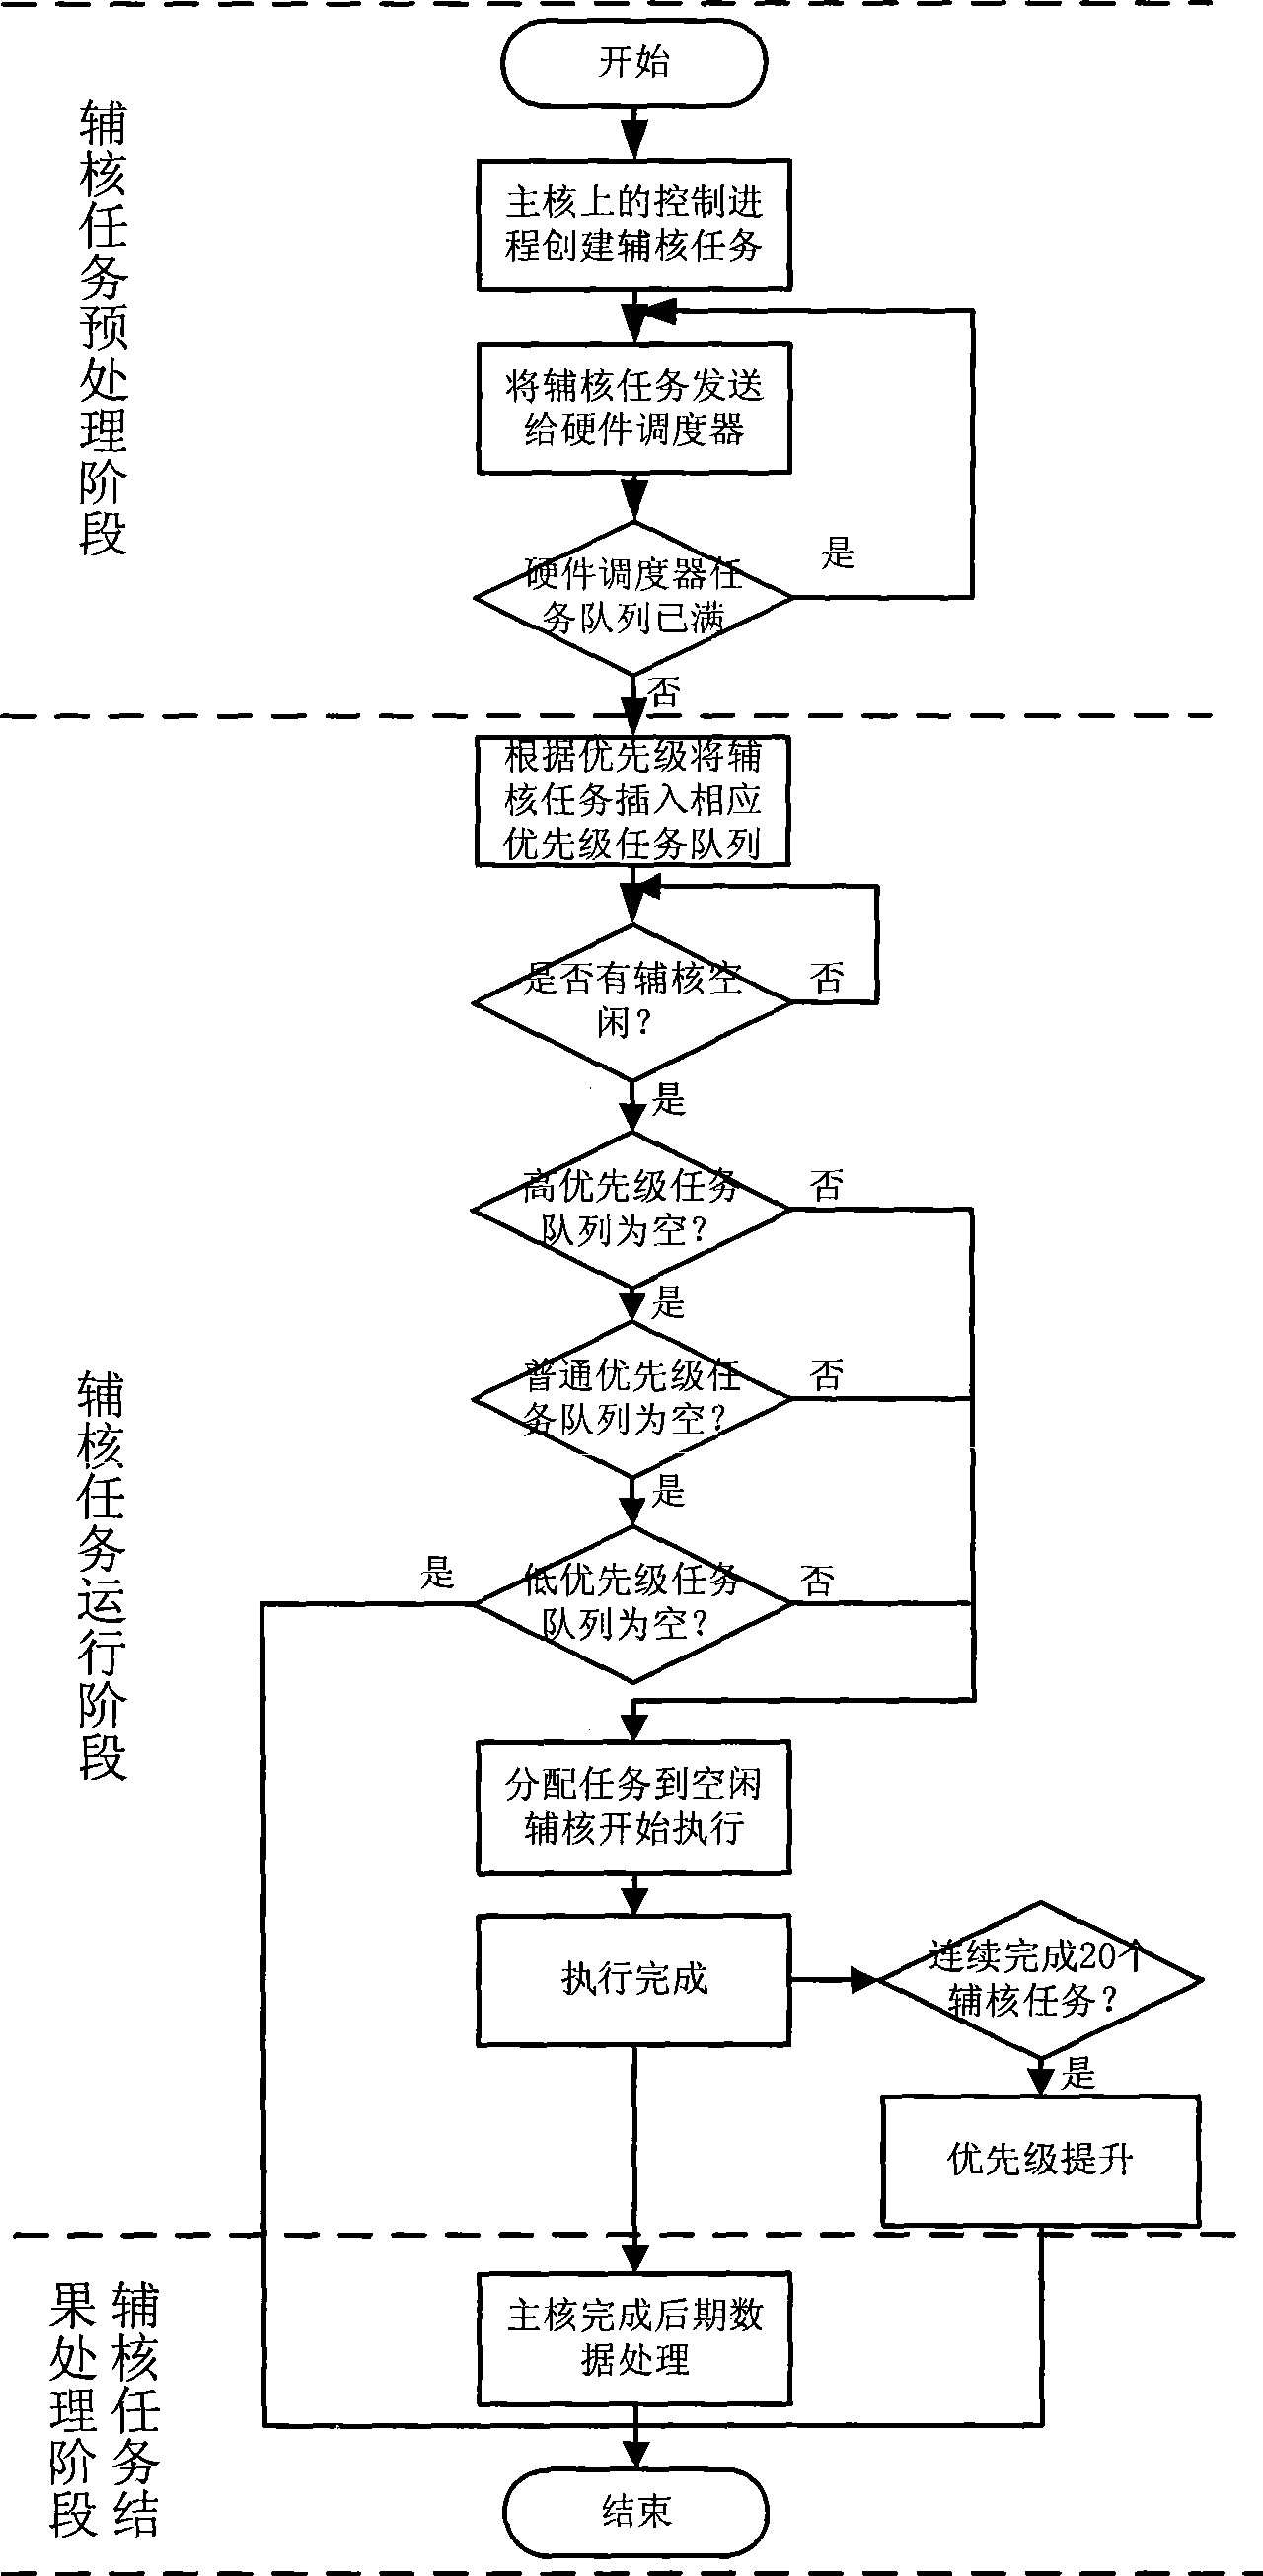 Method for implementing assist nuclear task dynamic PRI scheduling with hardware assistant